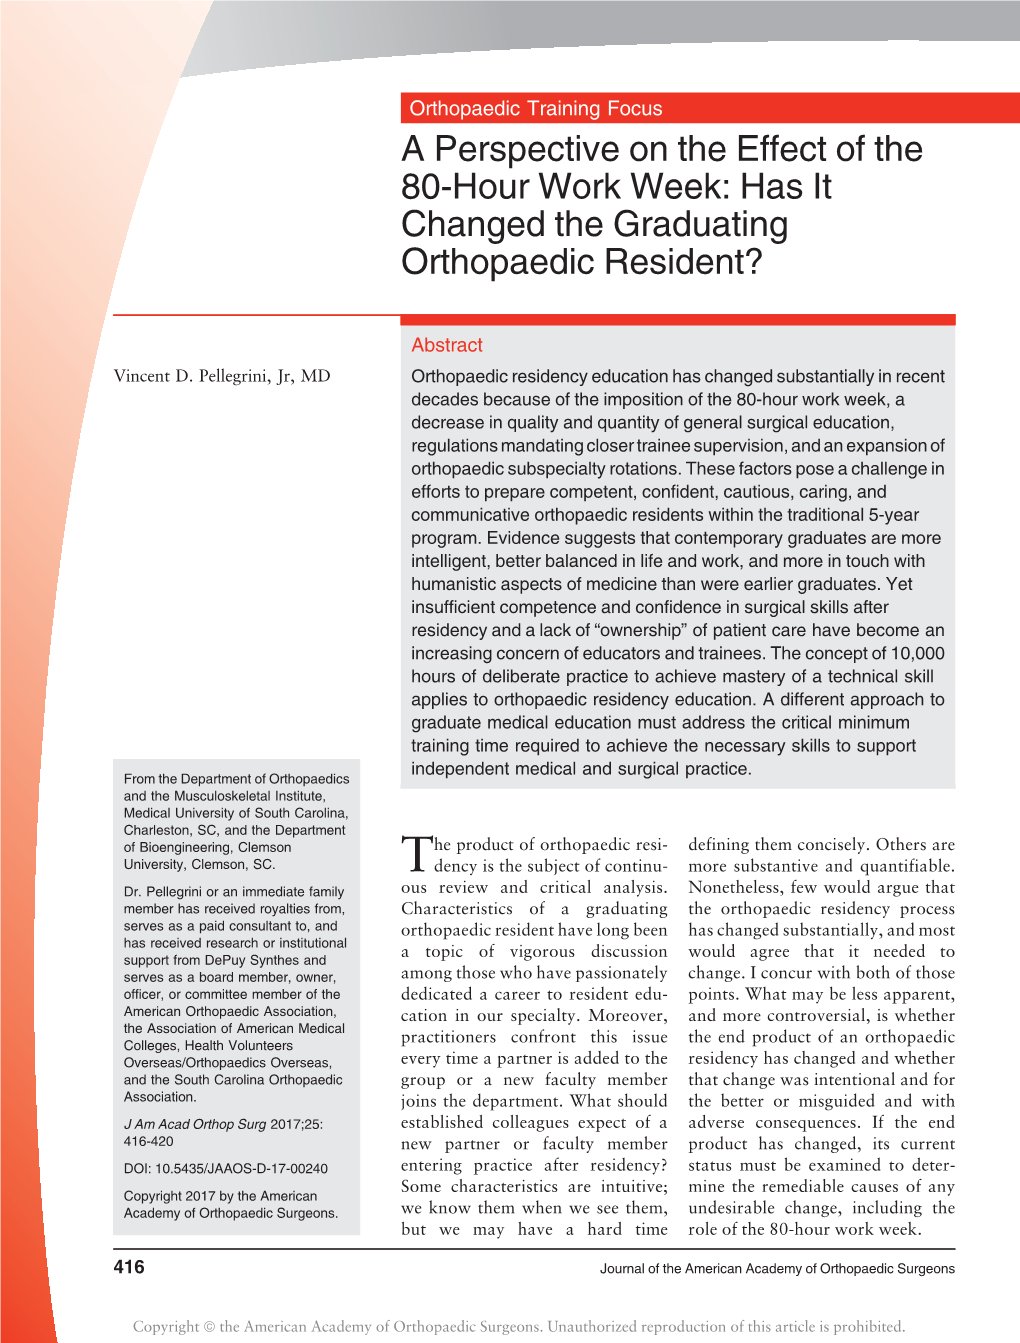 A Perspective on the Effect of the 80-Hour Work Week: Has It Changed the Graduating Orthopaedic Resident?